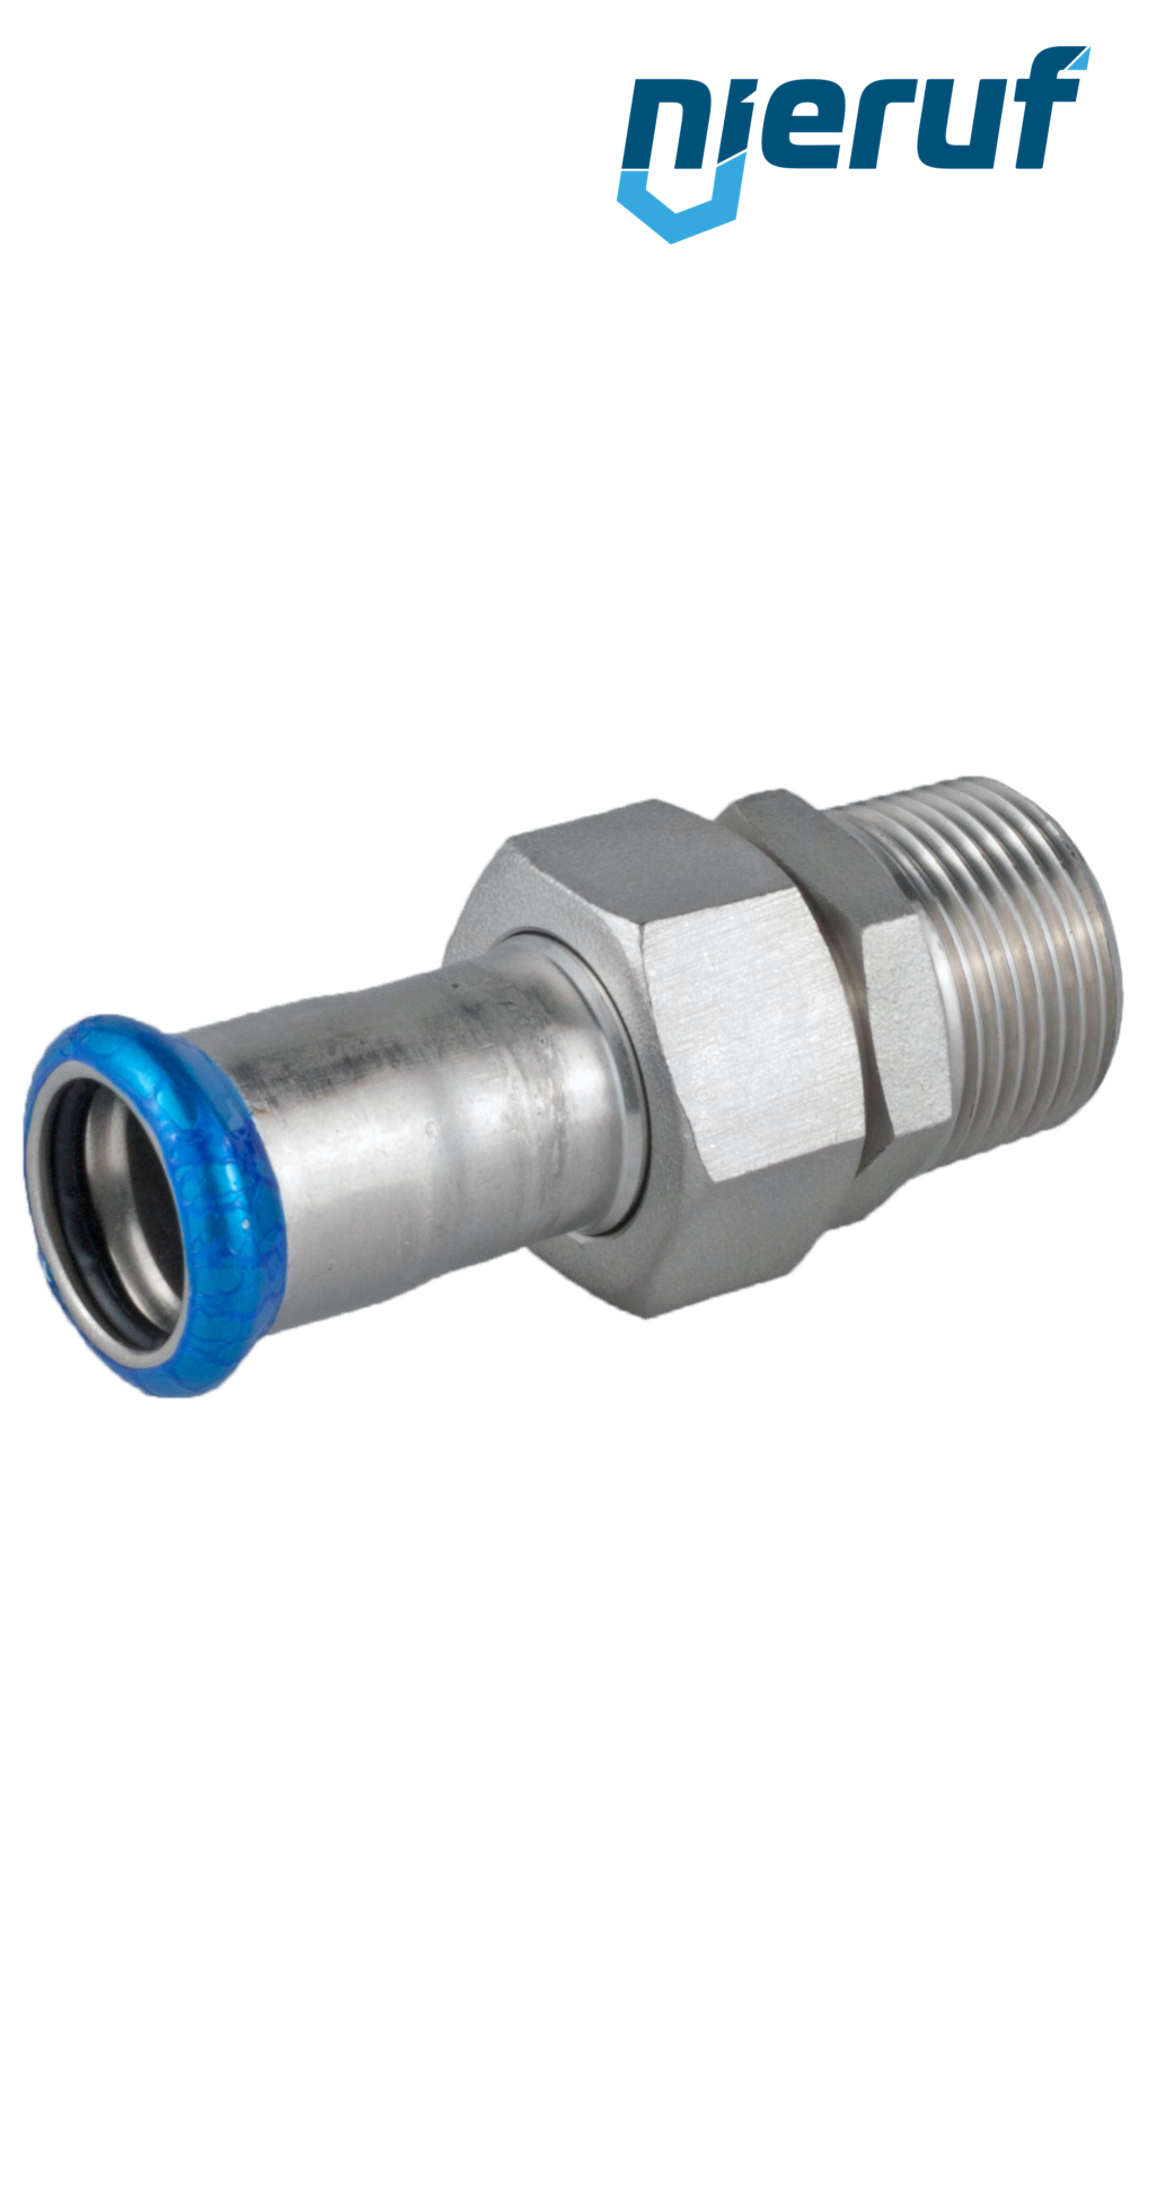 Union Coupling Pressfitting F DN20 - 22,0 mm male thread 1/2" inch stainless steel